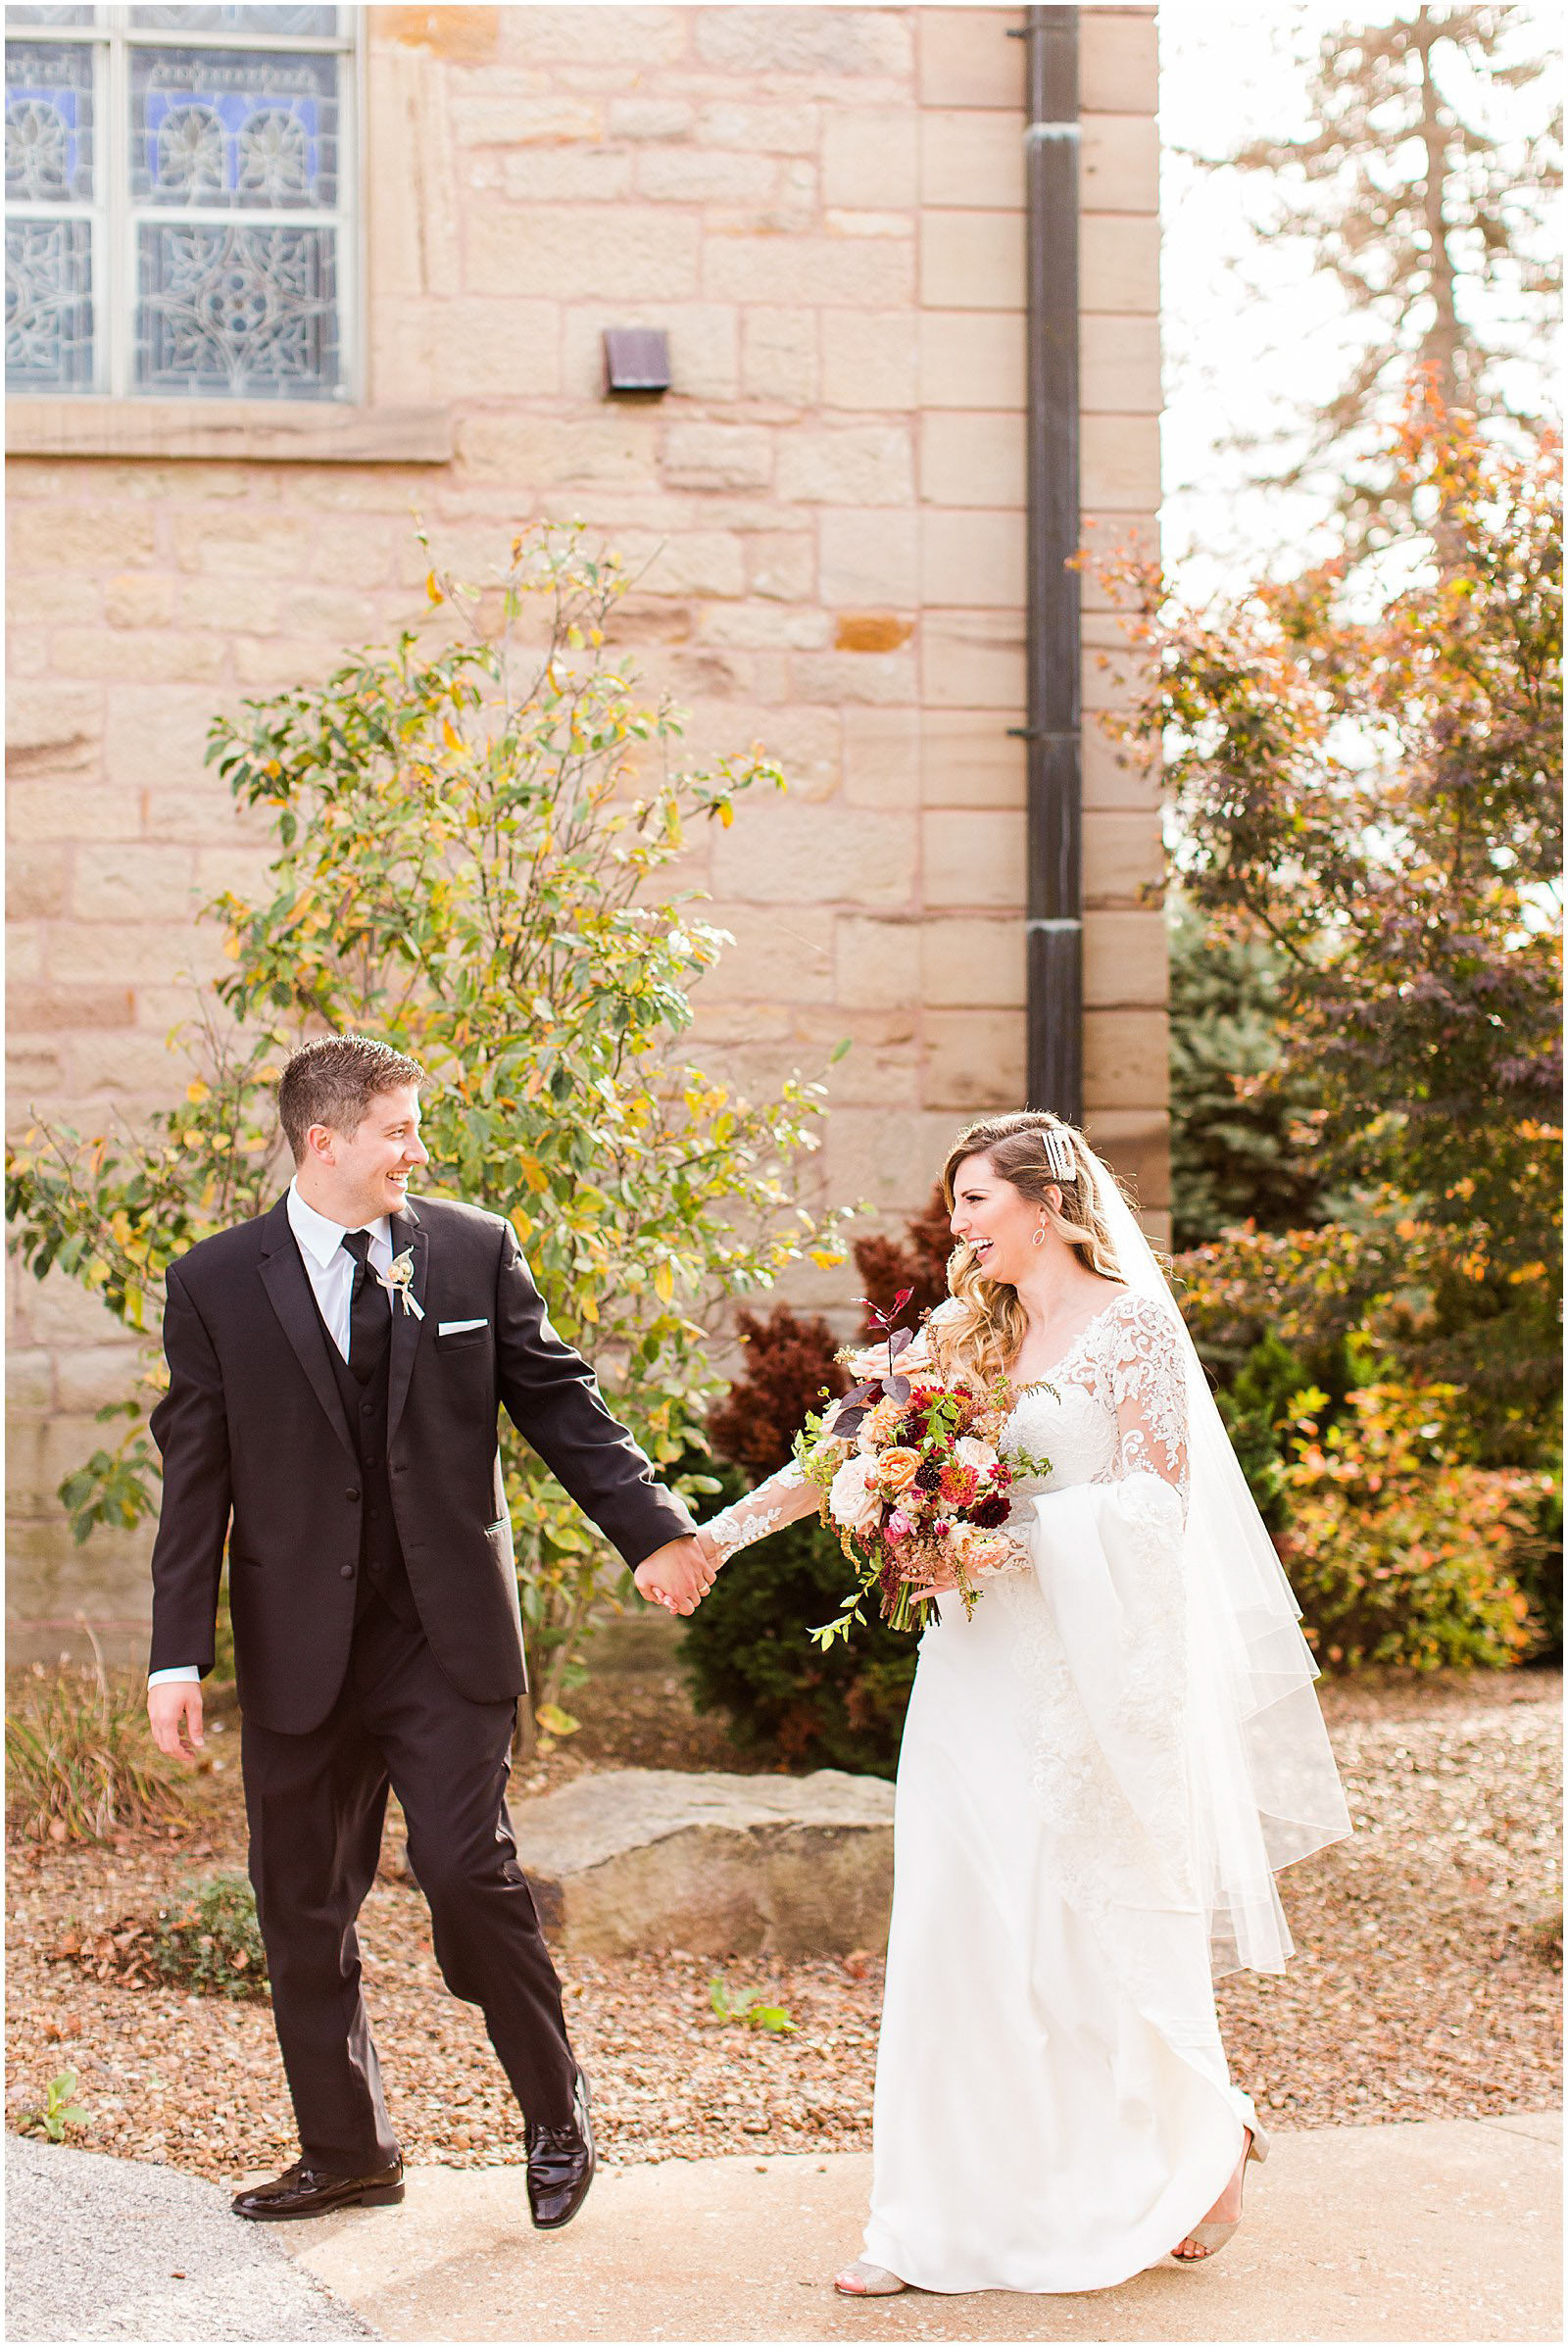 A Romantic Fall Wedding in Ferdinand, IN | Tori and Kyle | Bret and Brandie Photography 0124.jpg